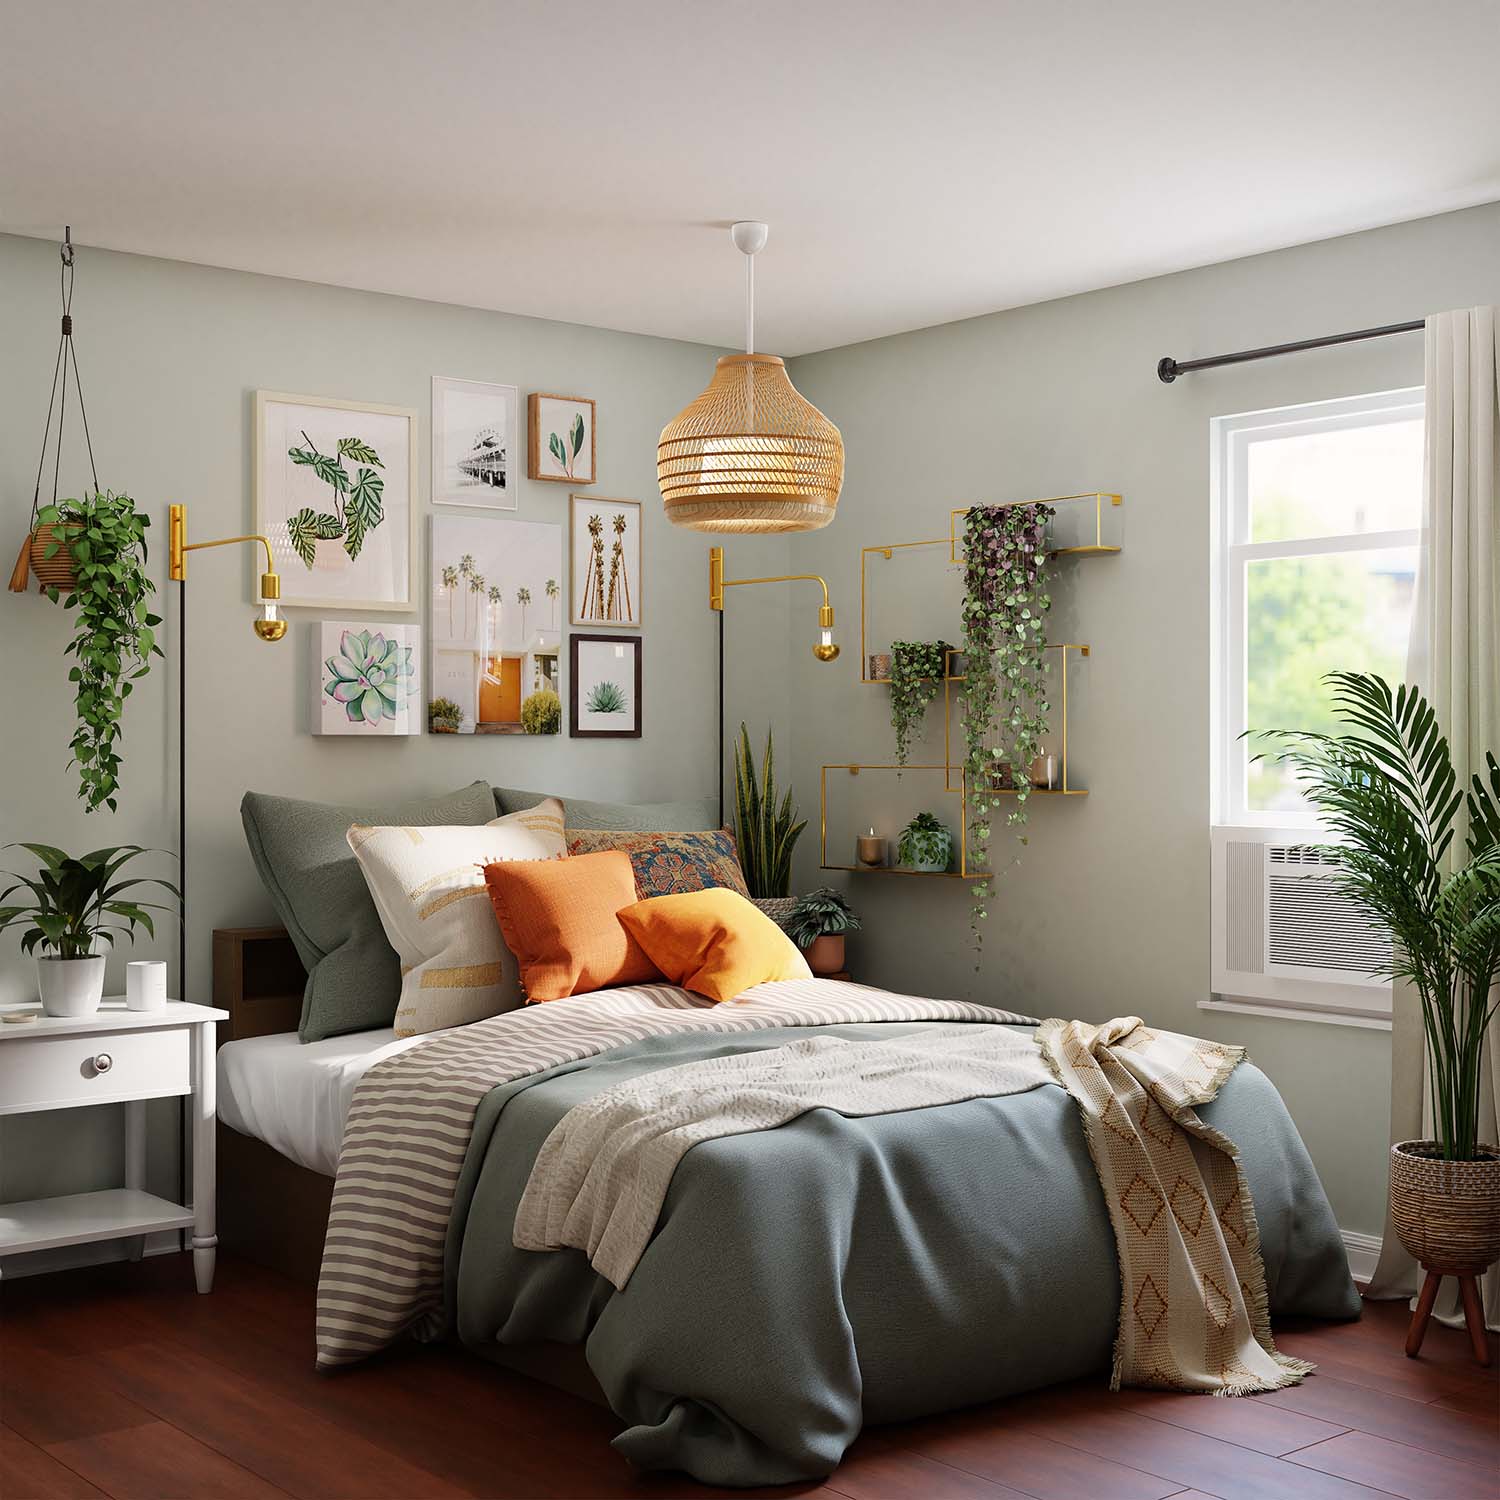 Bedroom Design Ideas: Want To Spruce Up Your Bedroom? Here Are Useful Interior Design Tips